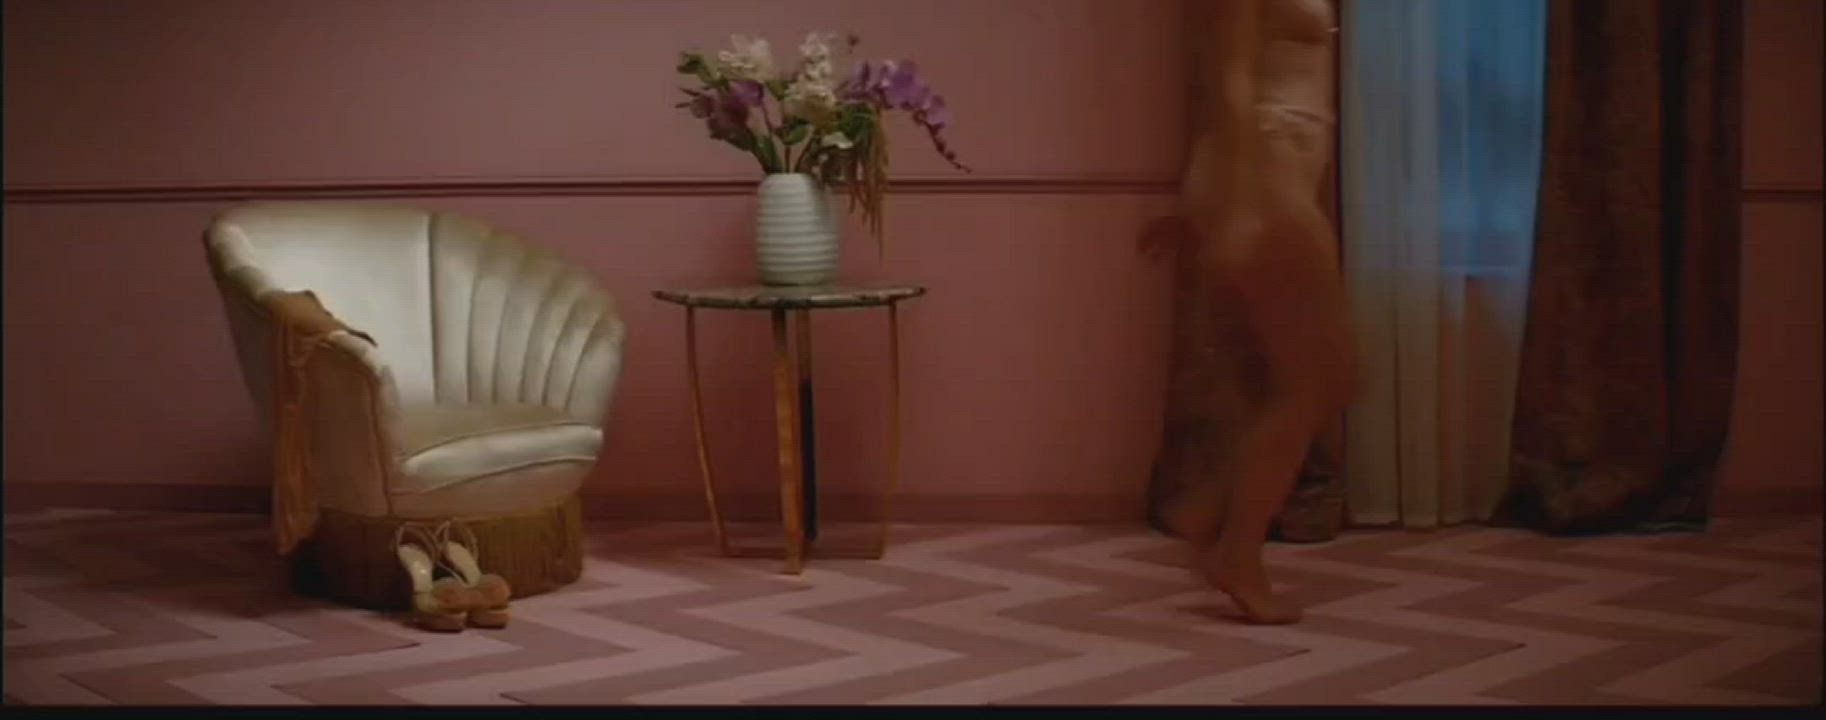 Ass Celebrity Jiggling Juno Temple gif